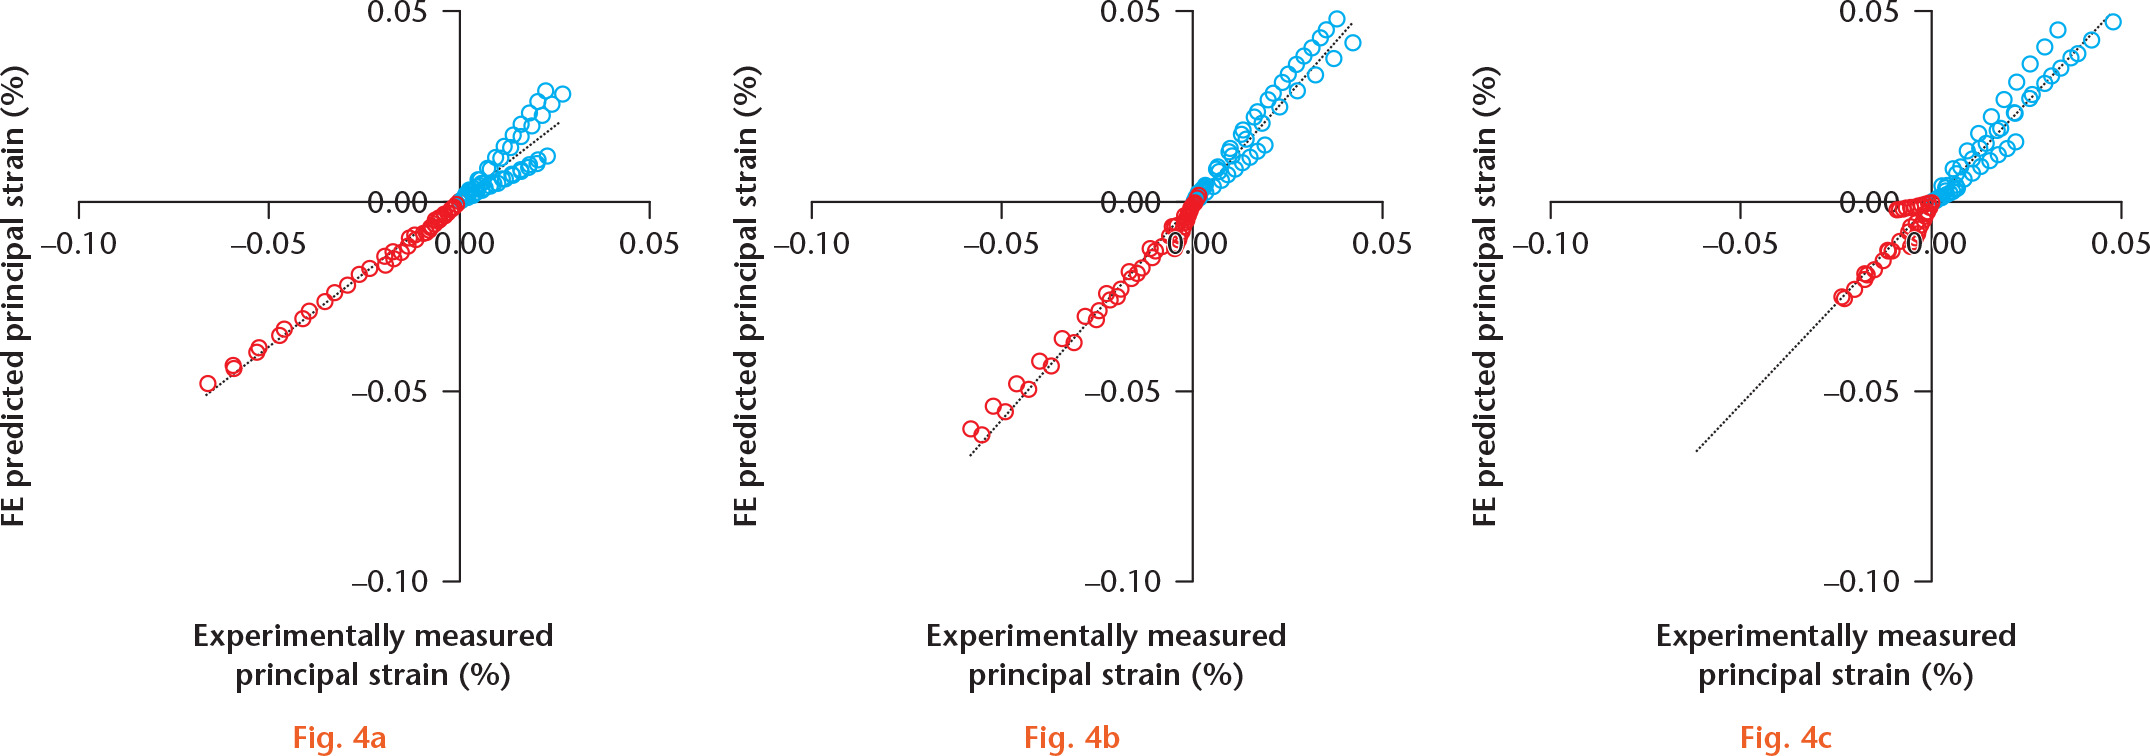  
            Maximum (blue) and minimum (red) principal strain at the five strain gauge locations for: a) the intact tibia; b) the stabilized osteotomized tibia with short span; and c) the stabilized osteotomized tibia with long span. FE, finite element.
          